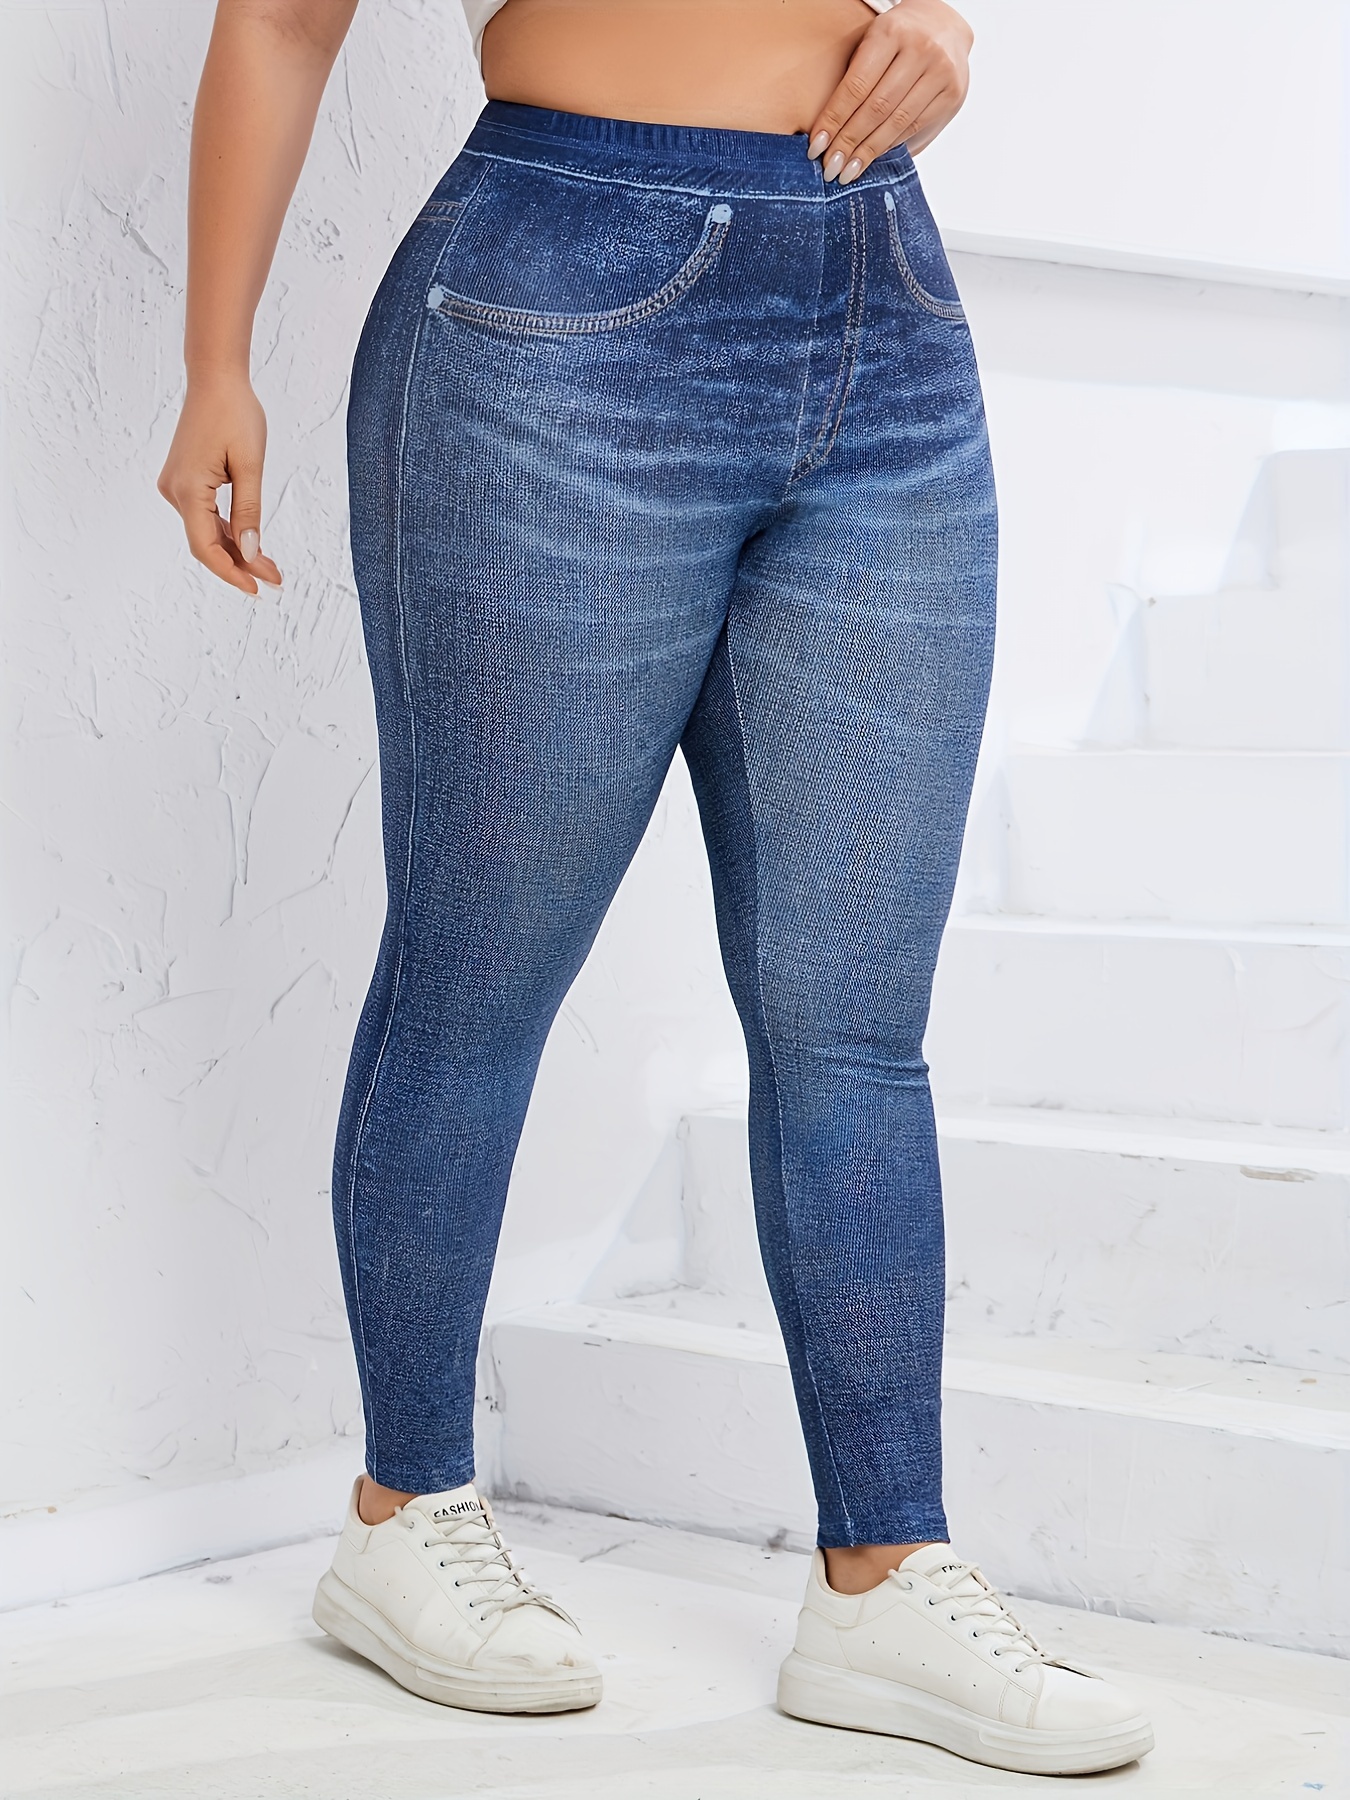  Jean Leggings for Women Plus Size Yoga Pants Fake Jeans Floral  Denim Print Stretch Jean High Waist Tights Jeggings Pants : Clothing, Shoes  & Jewelry